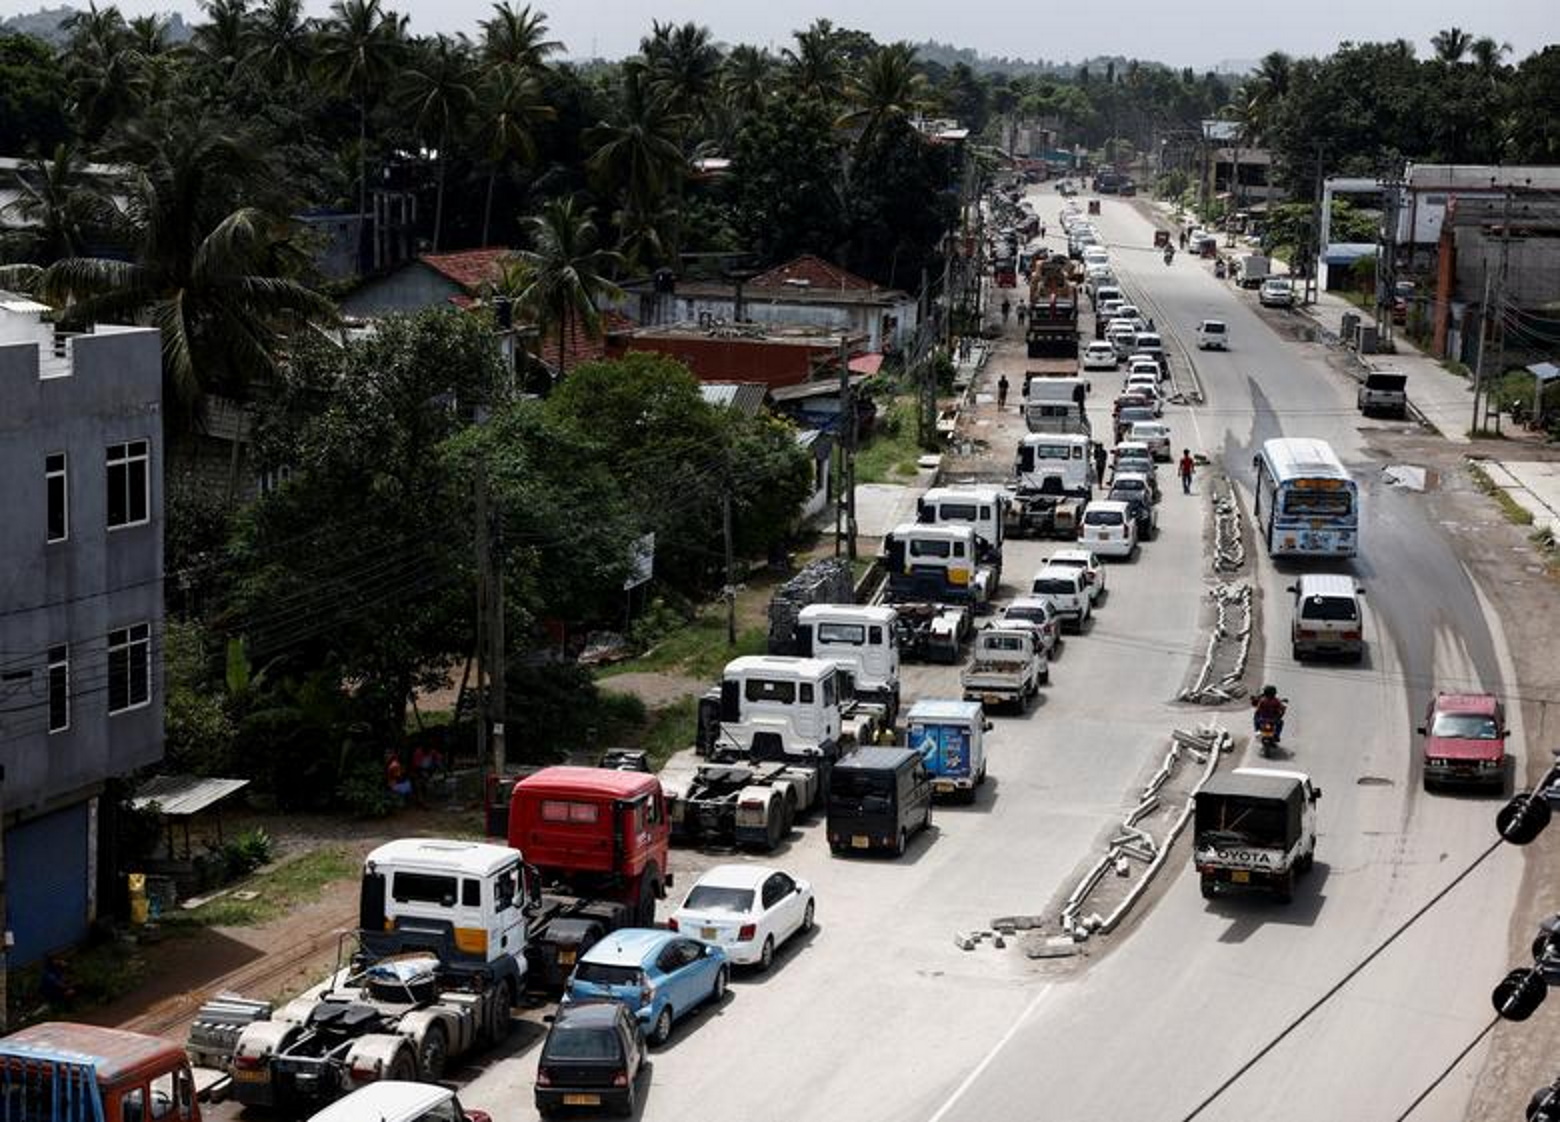 Vehicles queue for diesel and petrol as they wait for a fuel tanker since the previous day amid the country's economic crisis, in Colombo, Sri Lanka, 23 June 2022. Photo: Dinuka Liyanawatte / REUTERS